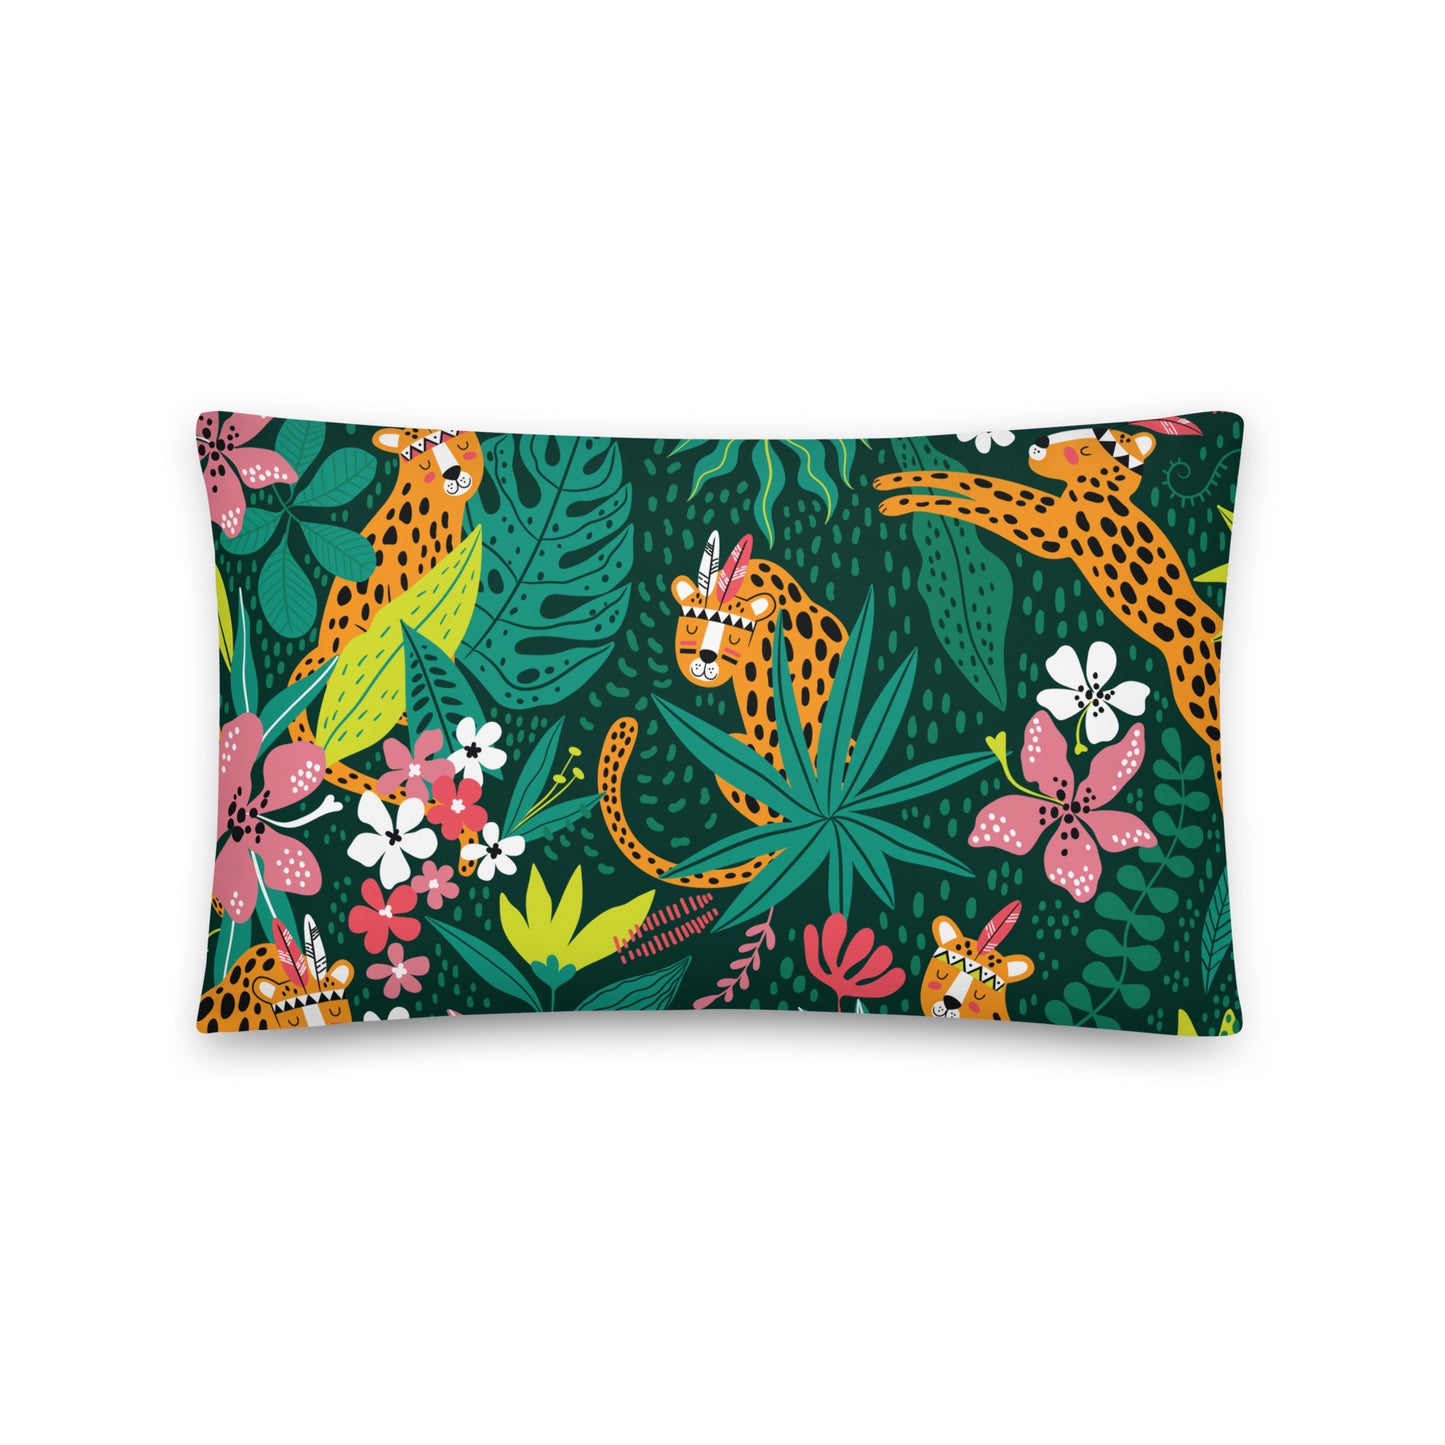 Jungle Party - Sustainably Made Pillows